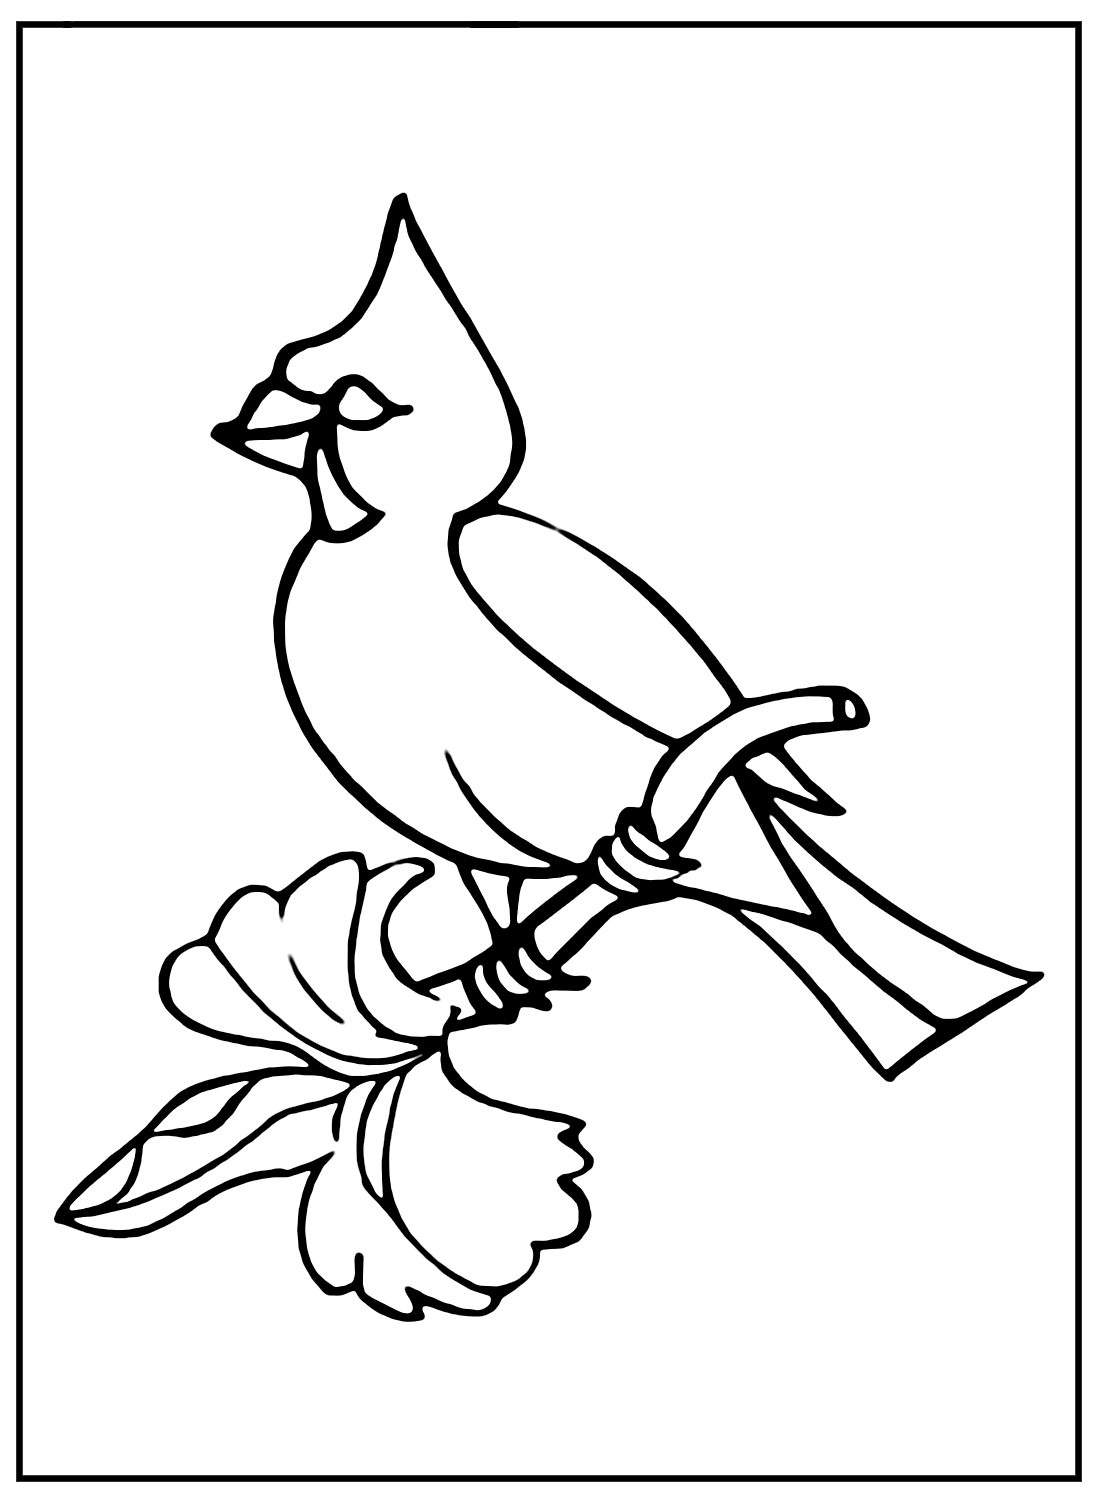 Cardinal to print Coloring Page - Free Printable Coloring Pages